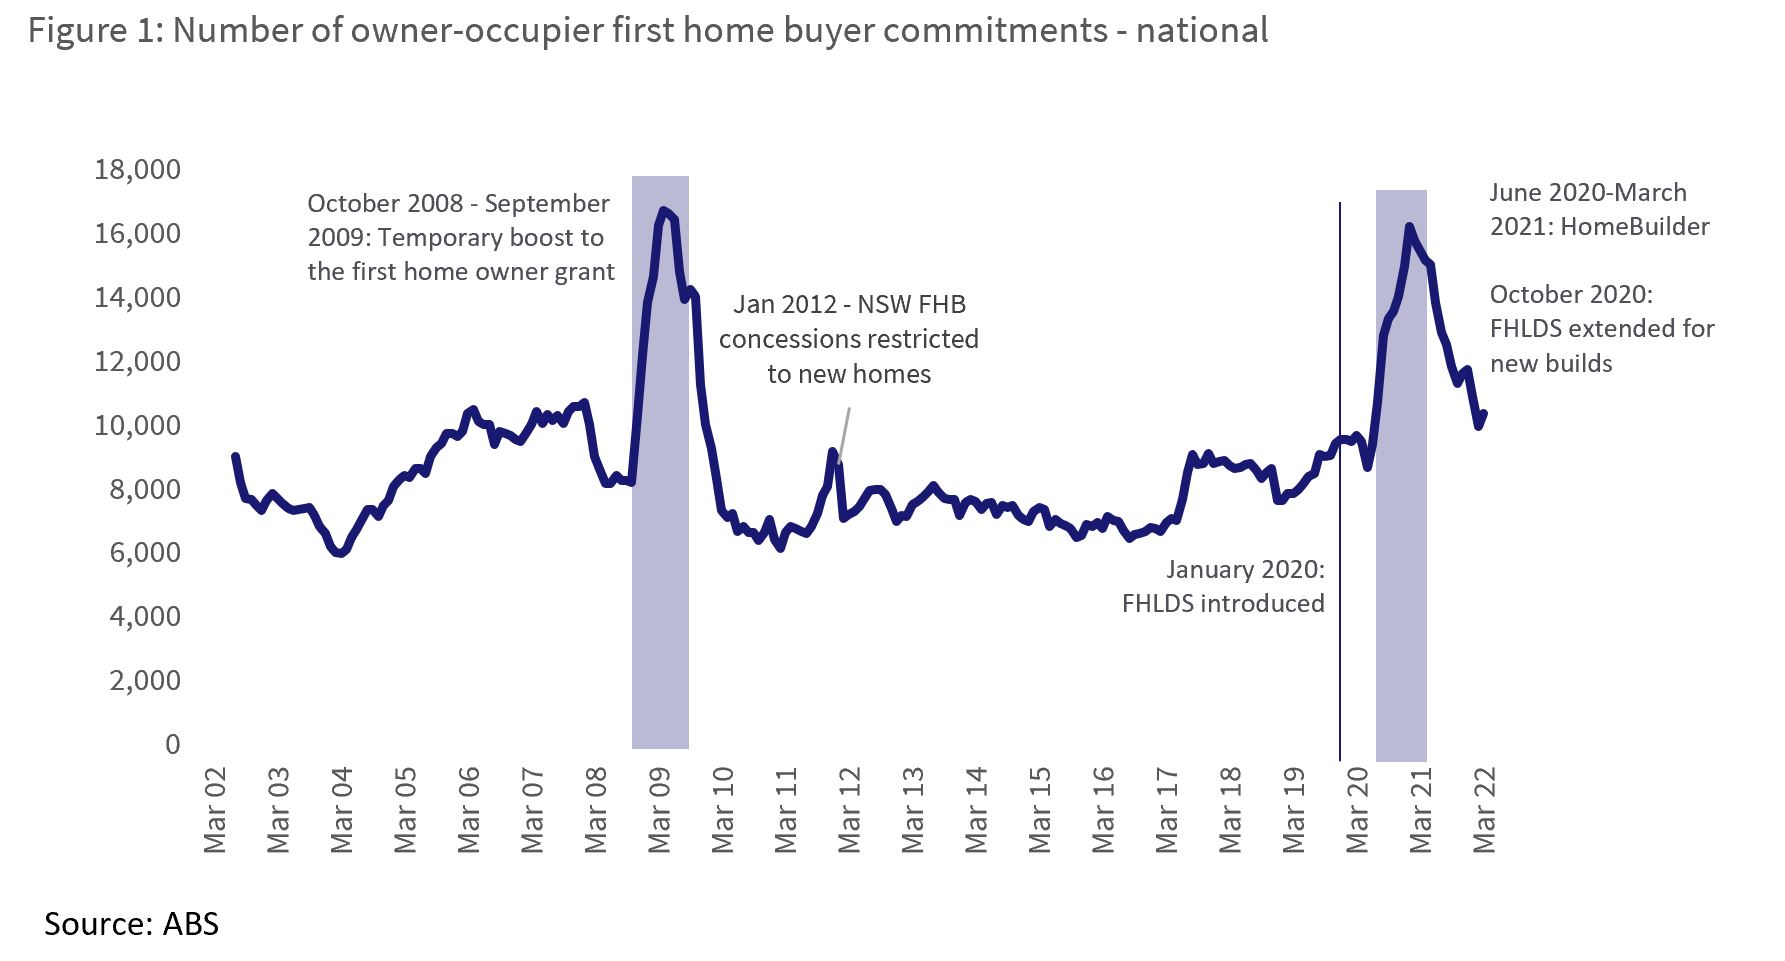 first homeownership buyer commitments